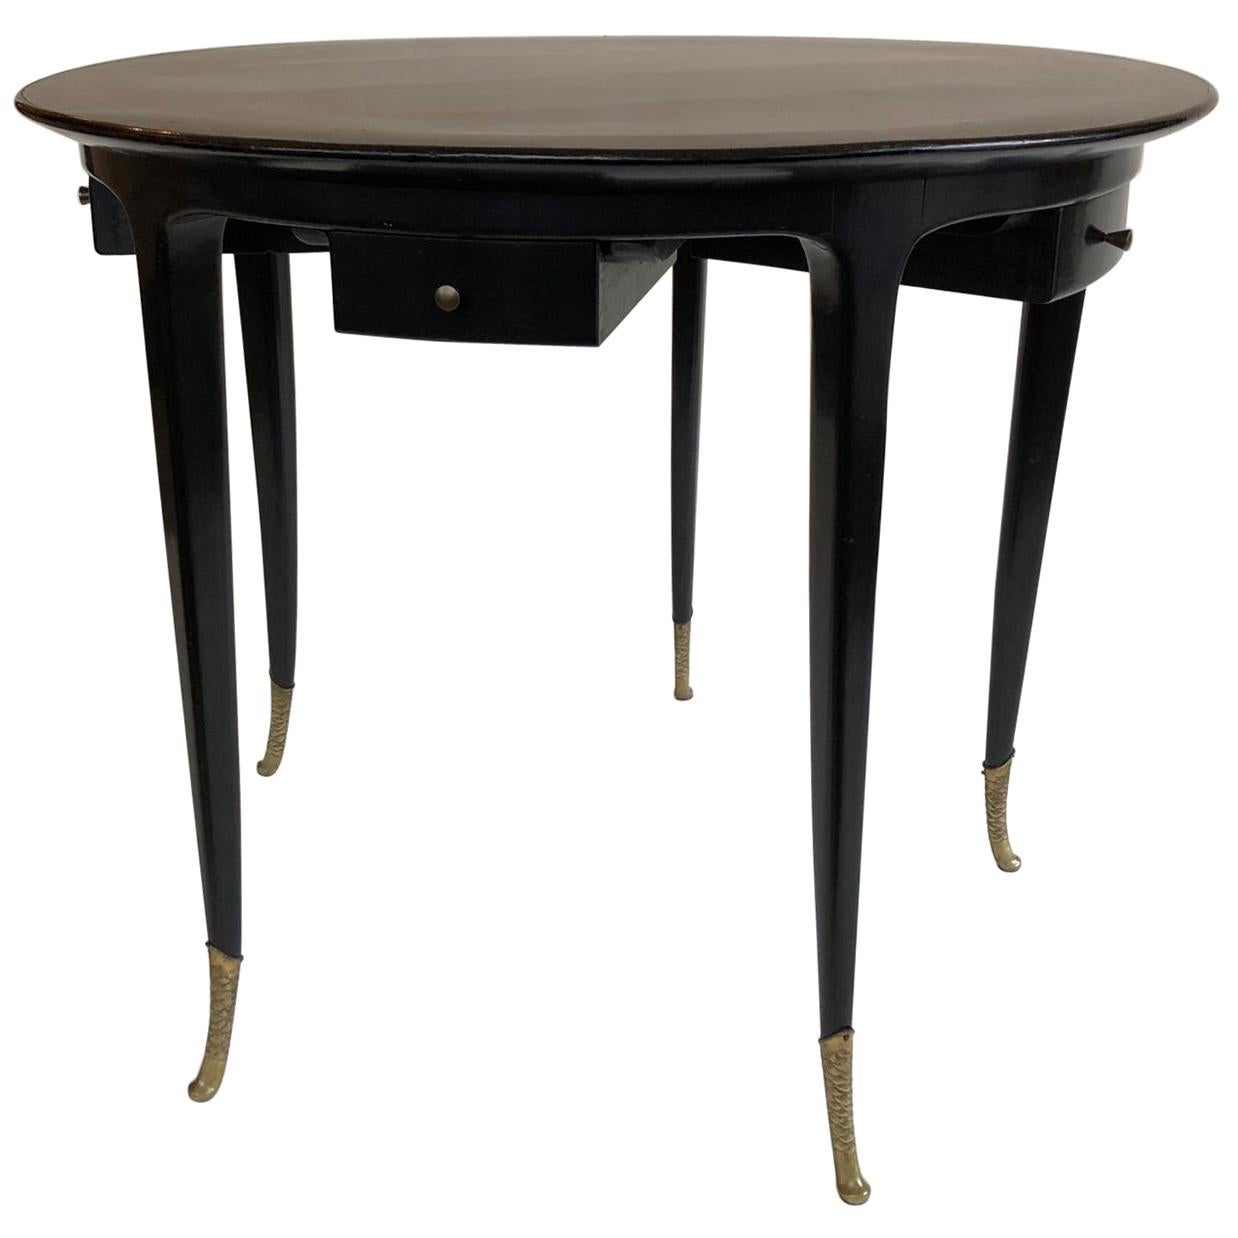 1940s Circular Black Ebonised Italian Games Table with Drawers and Brass Sabots